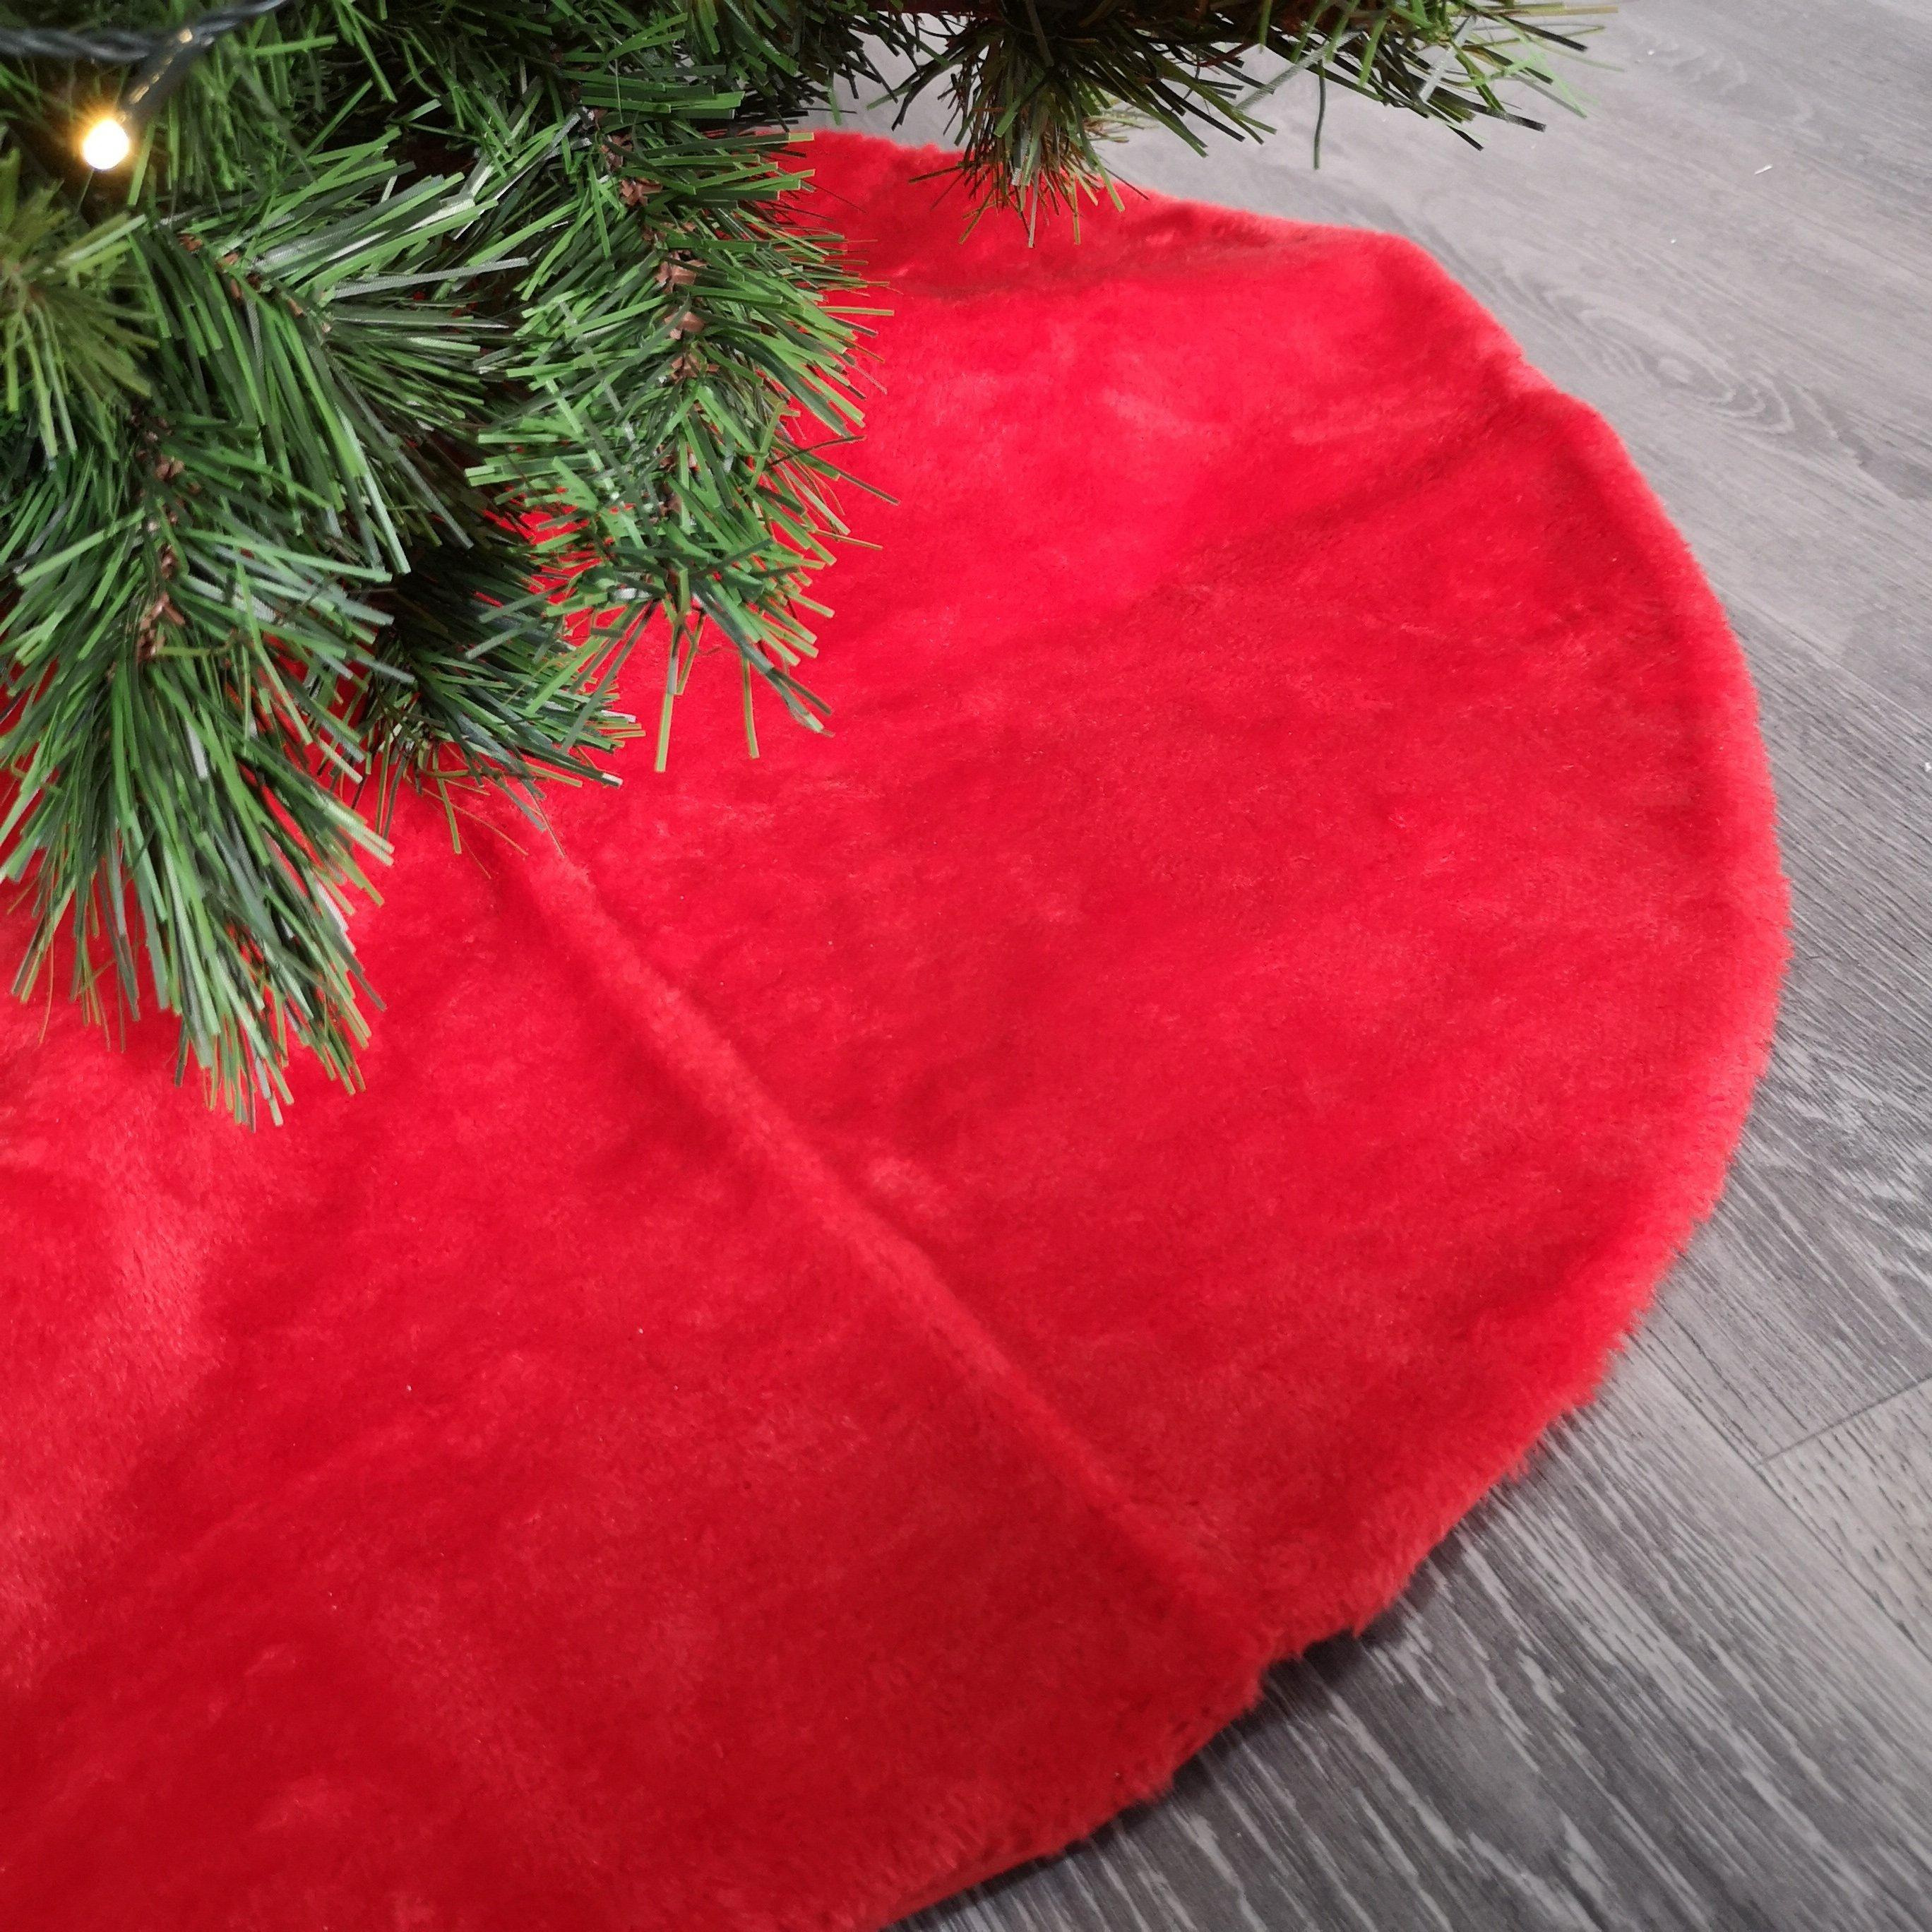 90cm Red Fluffy Plush Christmas Tree Skirt with Ribbon Ties by ...